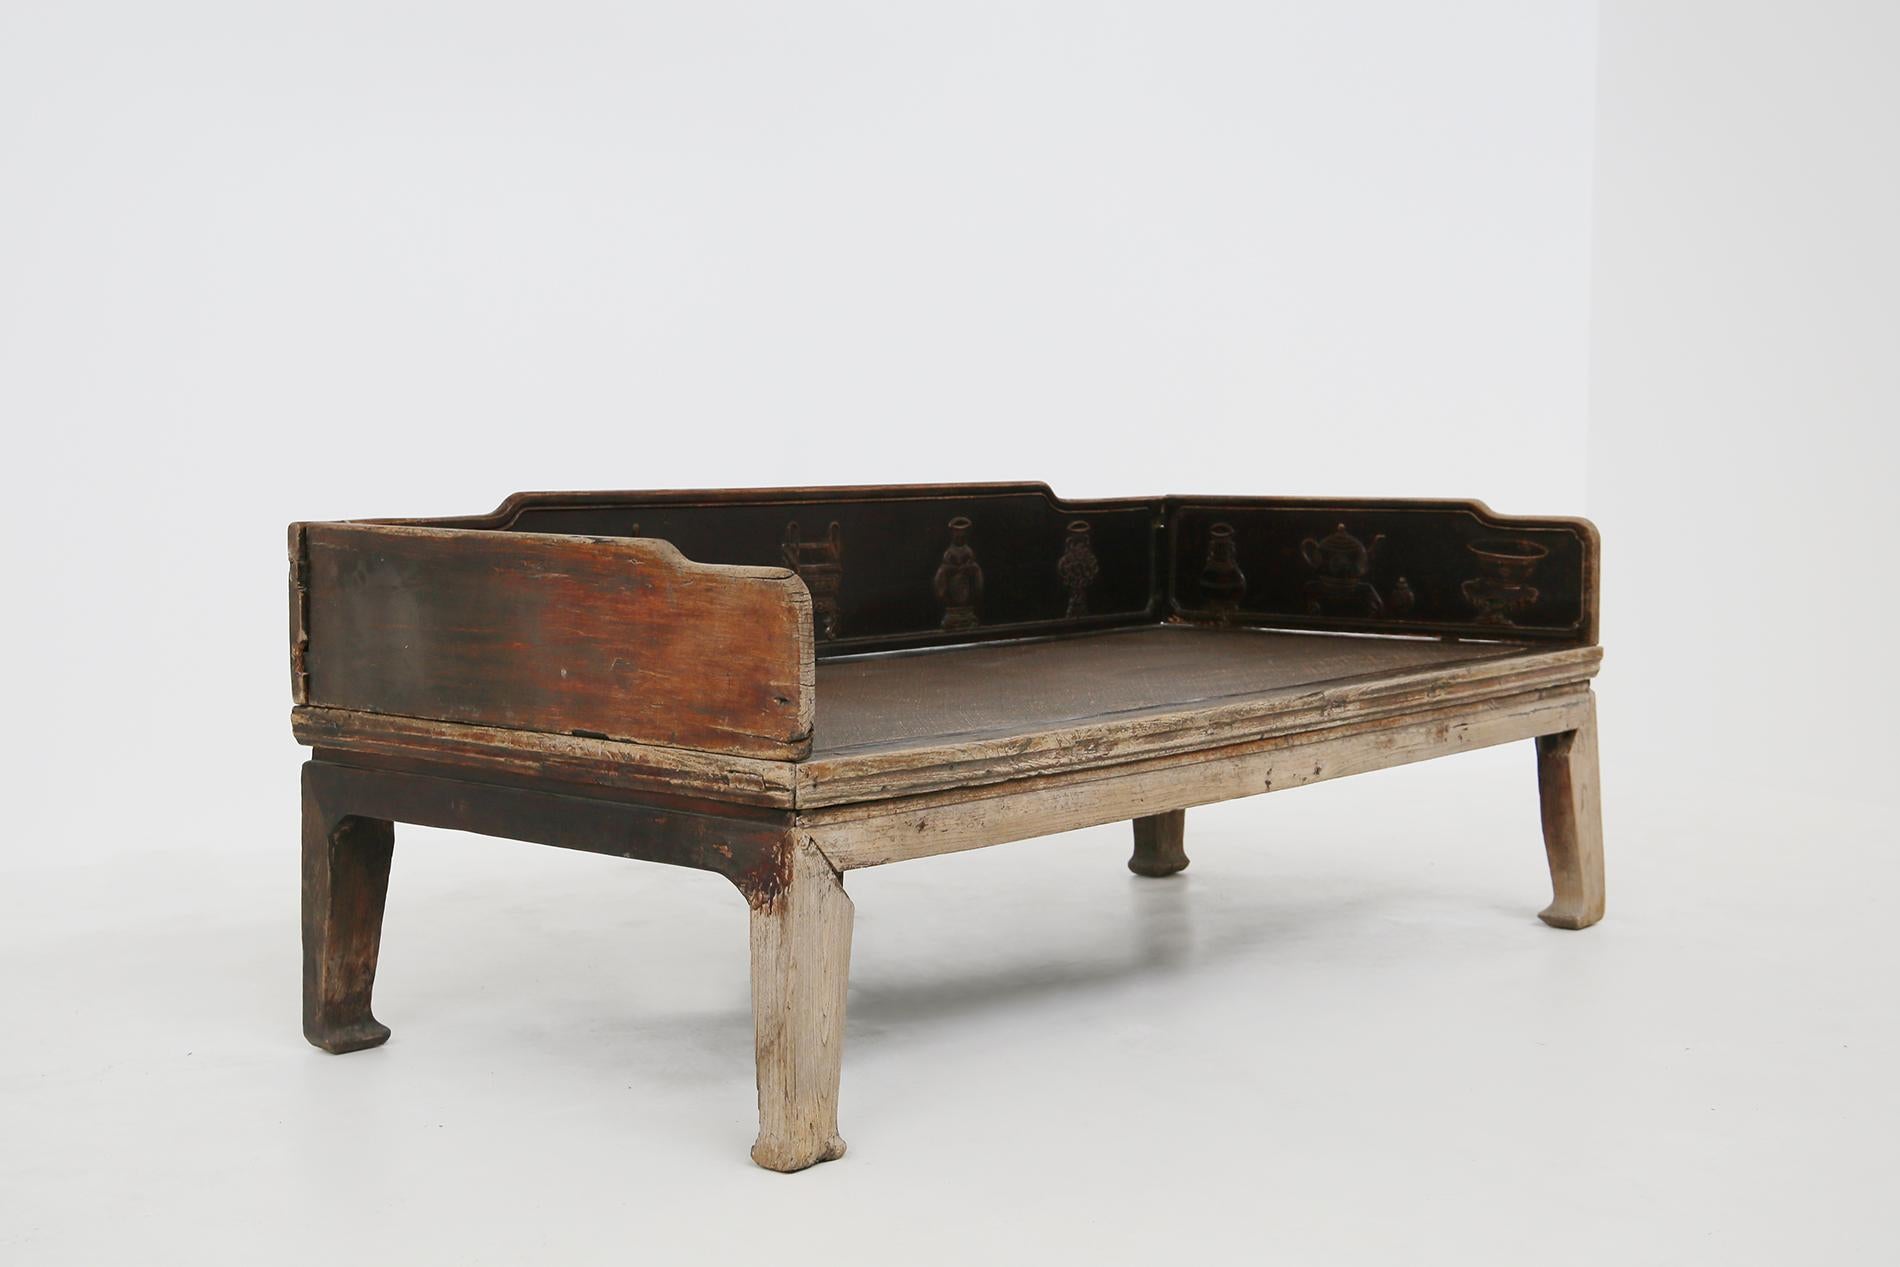 Ancient late Ming sofa bed of elegant proportions, the removable rails of the backrest and armrests are made of carved wooden panels. The ornaments have been carefully inlaid with jars and various containers. The central panel has a sinuous line